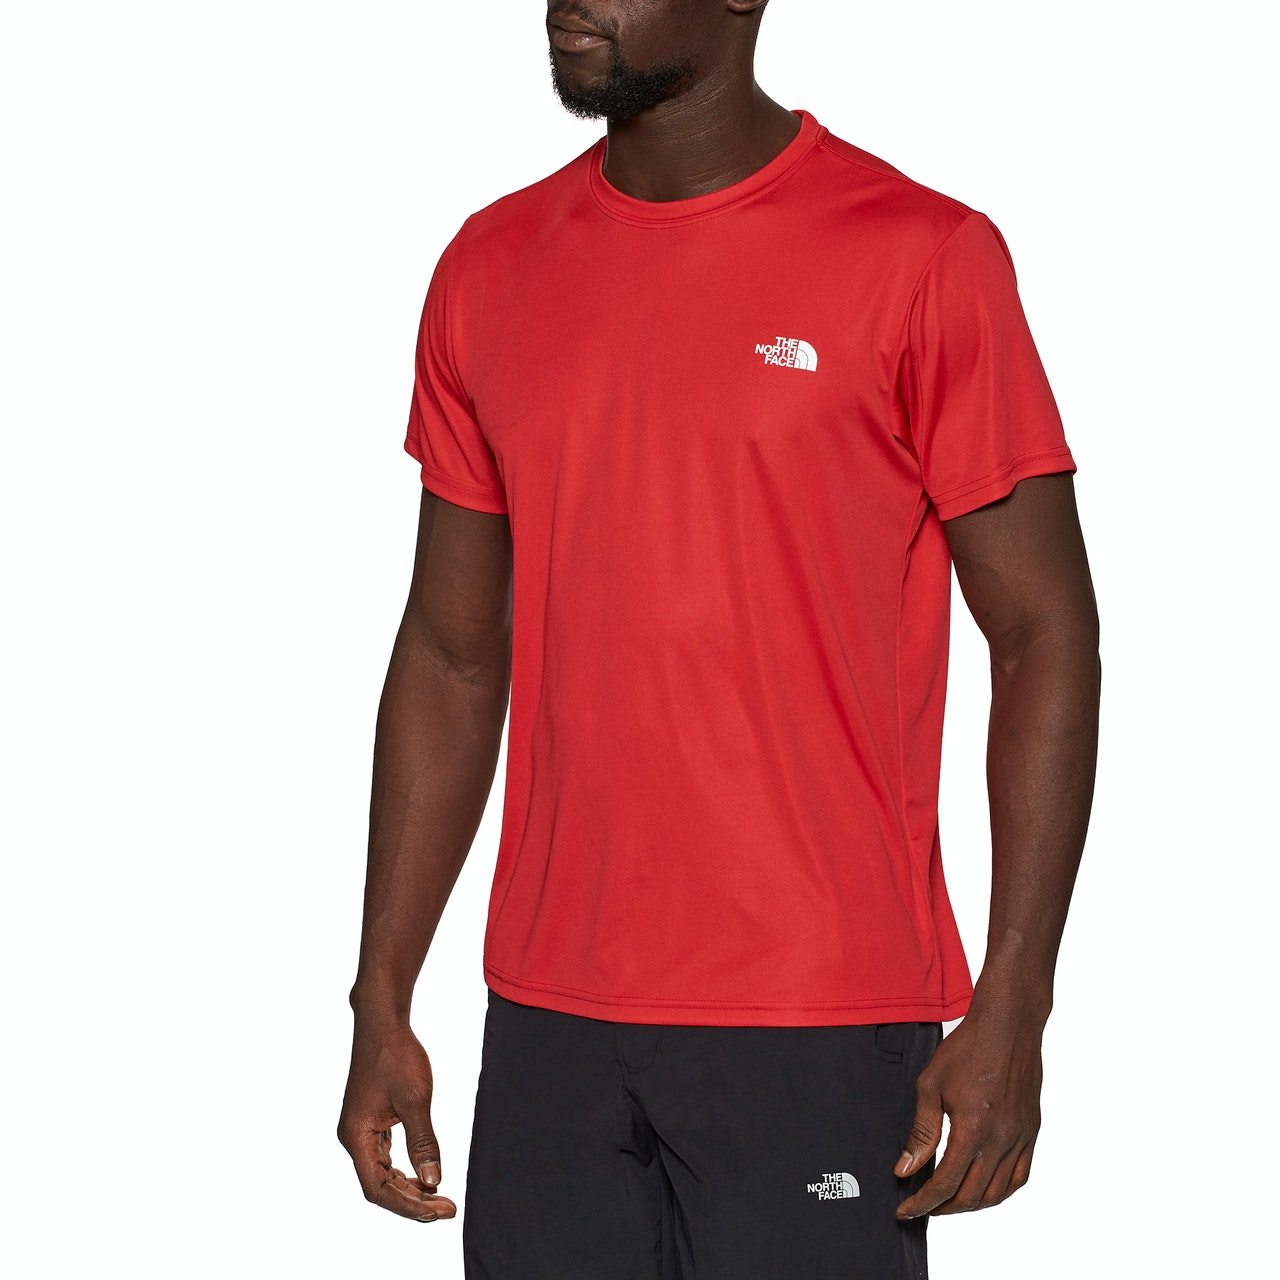 North Face Reaxion Amp Crew Mens Sports Top - TNF Red